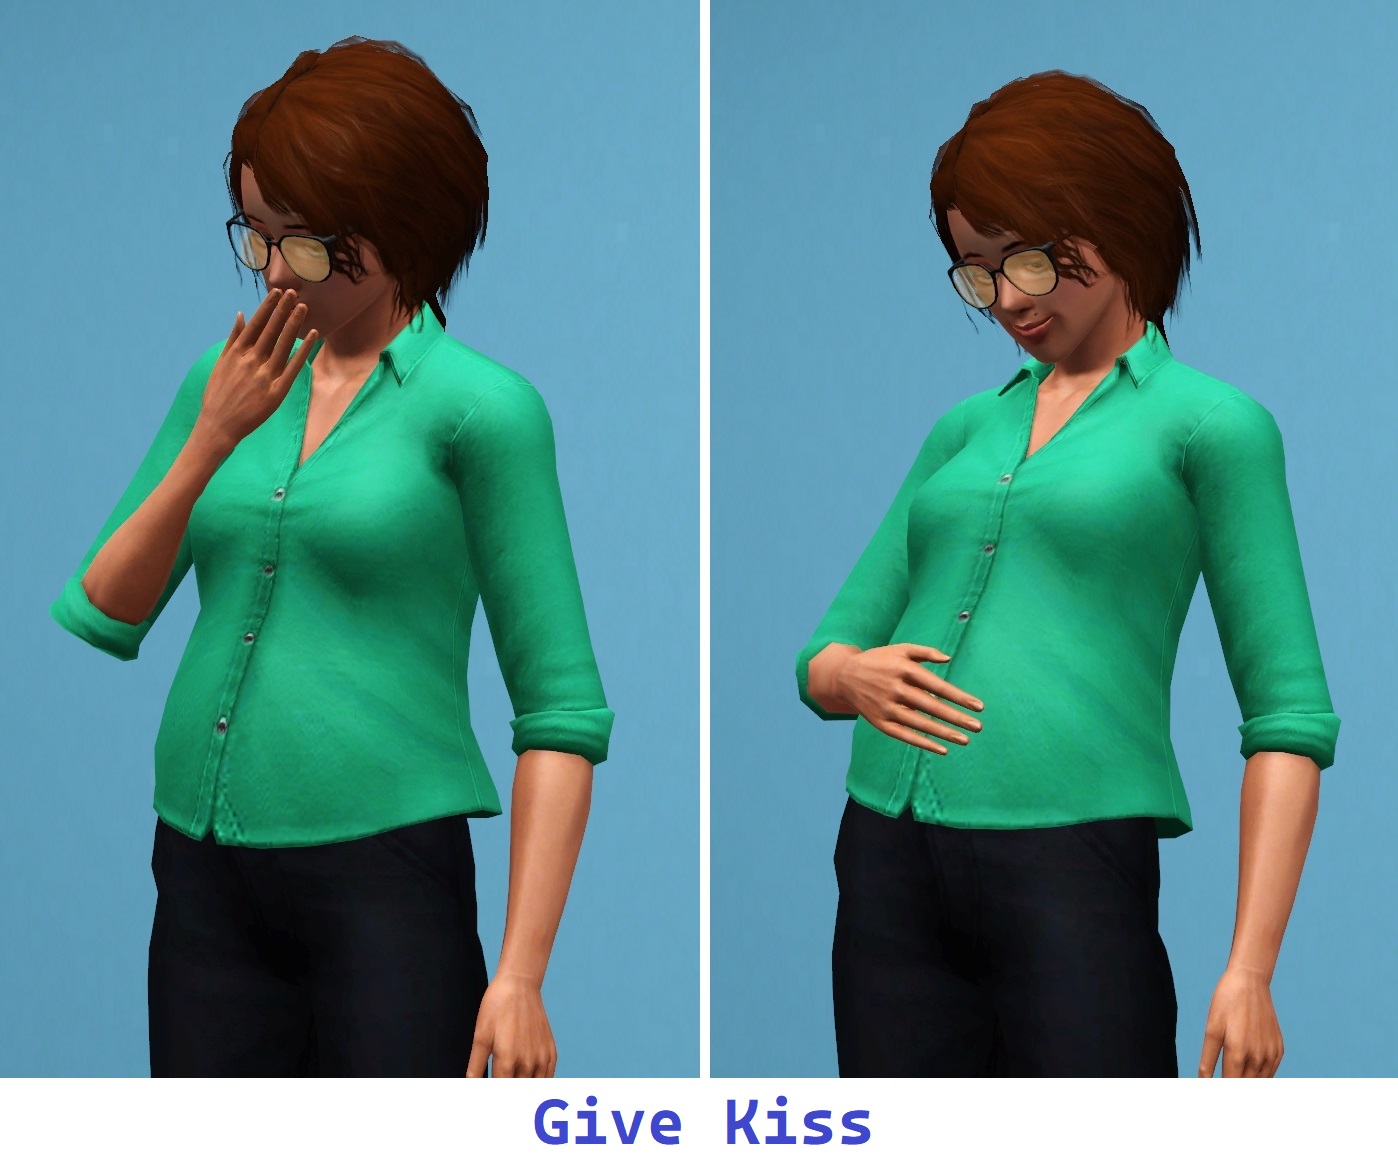 Bust/Waist/Hip Measurement screenshots, images and pictures